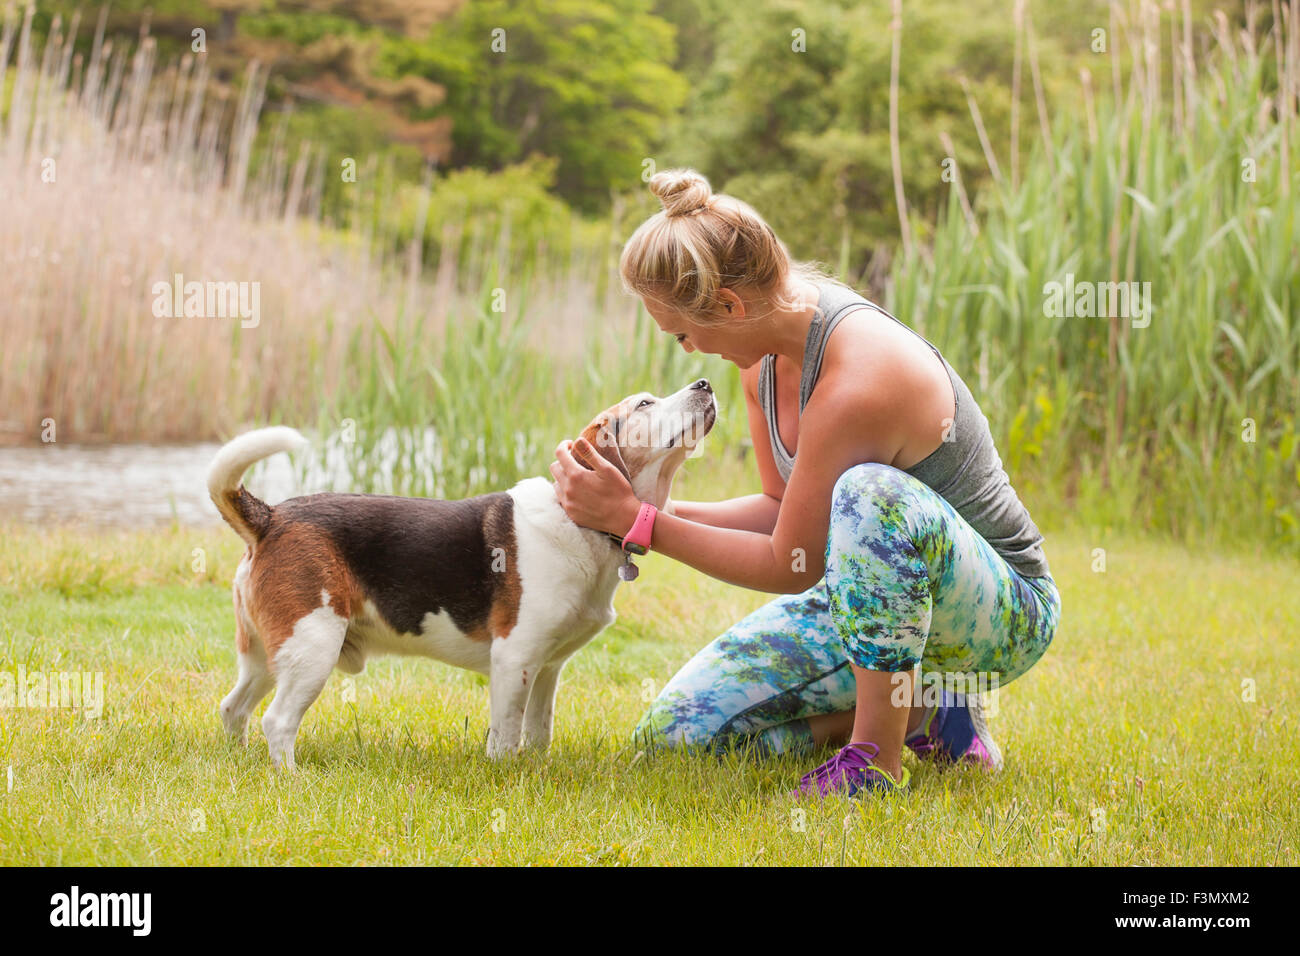 Woman petting dog Banque D'Images